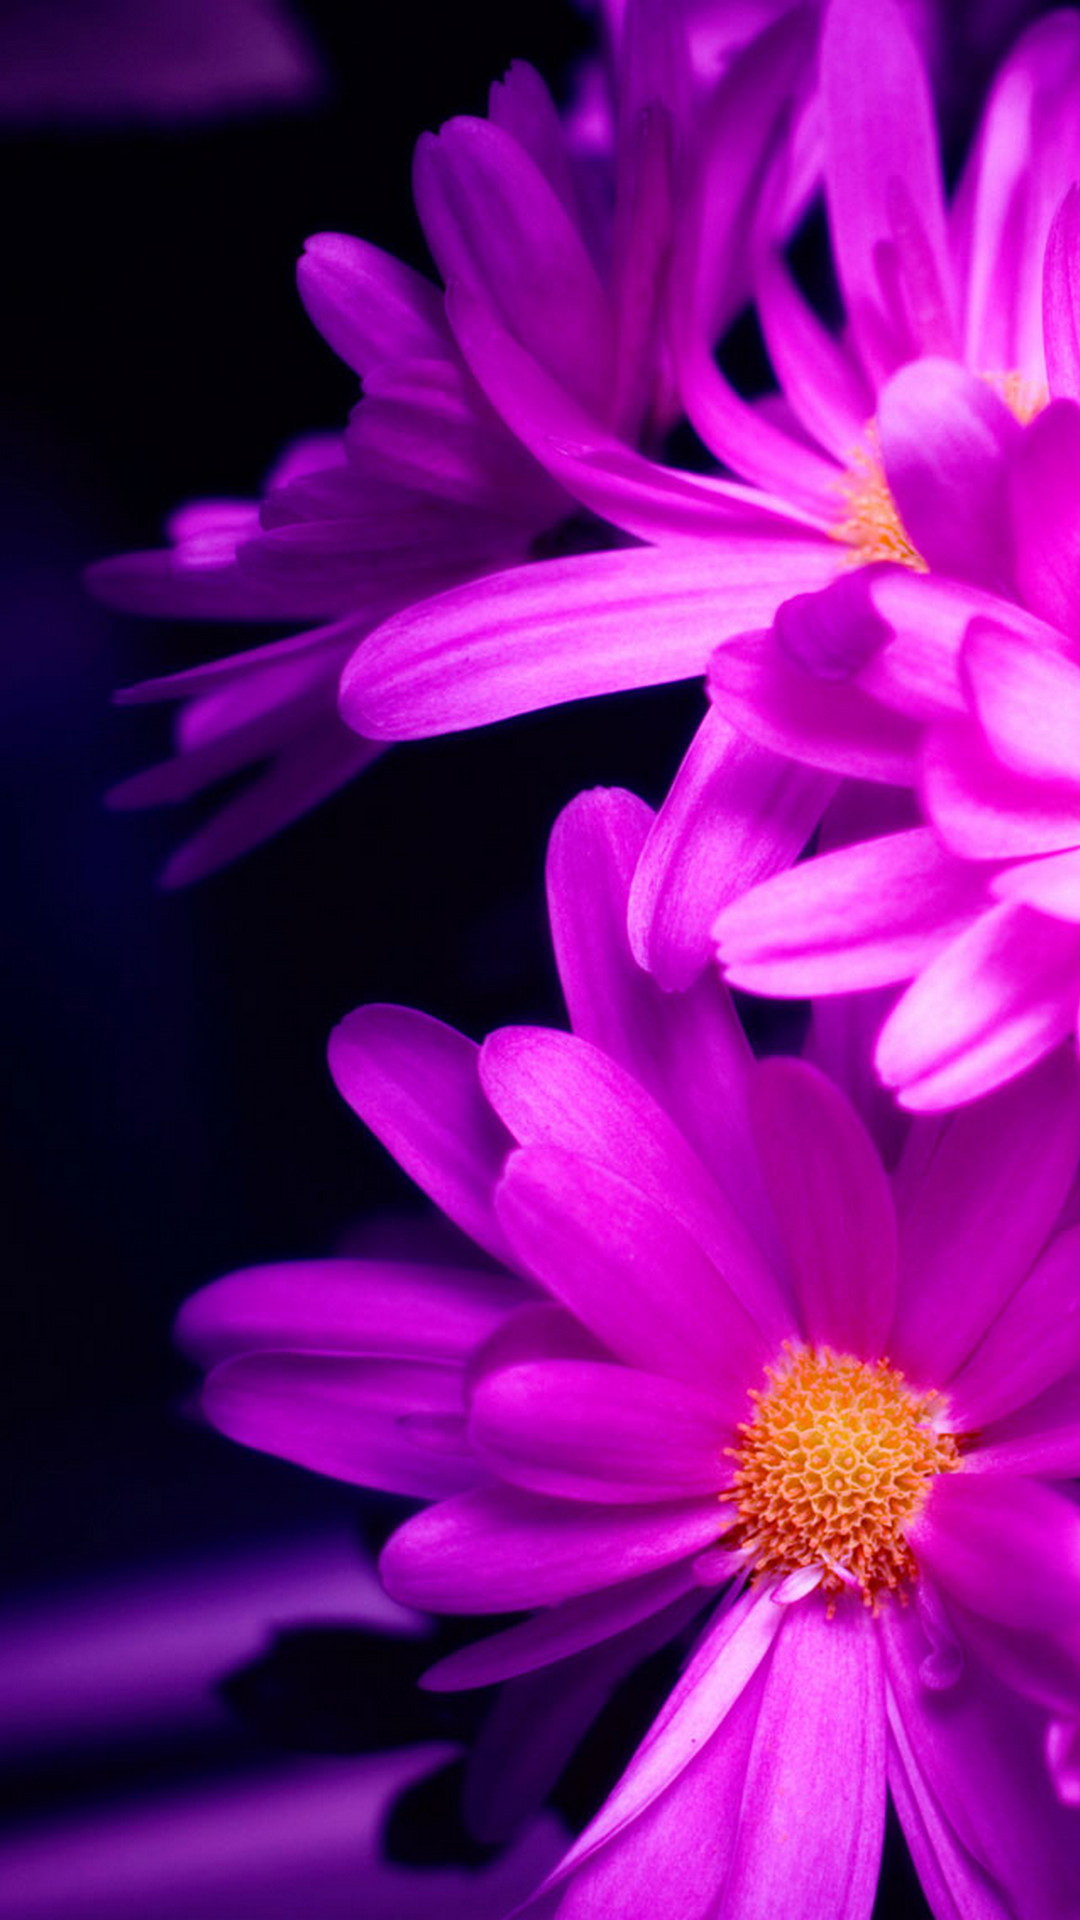 Flowers Purple Android Wallpaper with high-resolution 1080x1920 pixel. You can use this wallpaper for your Android backgrounds, Tablet, Samsung Screensavers, Mobile Phone Lock Screen and another Smartphones device